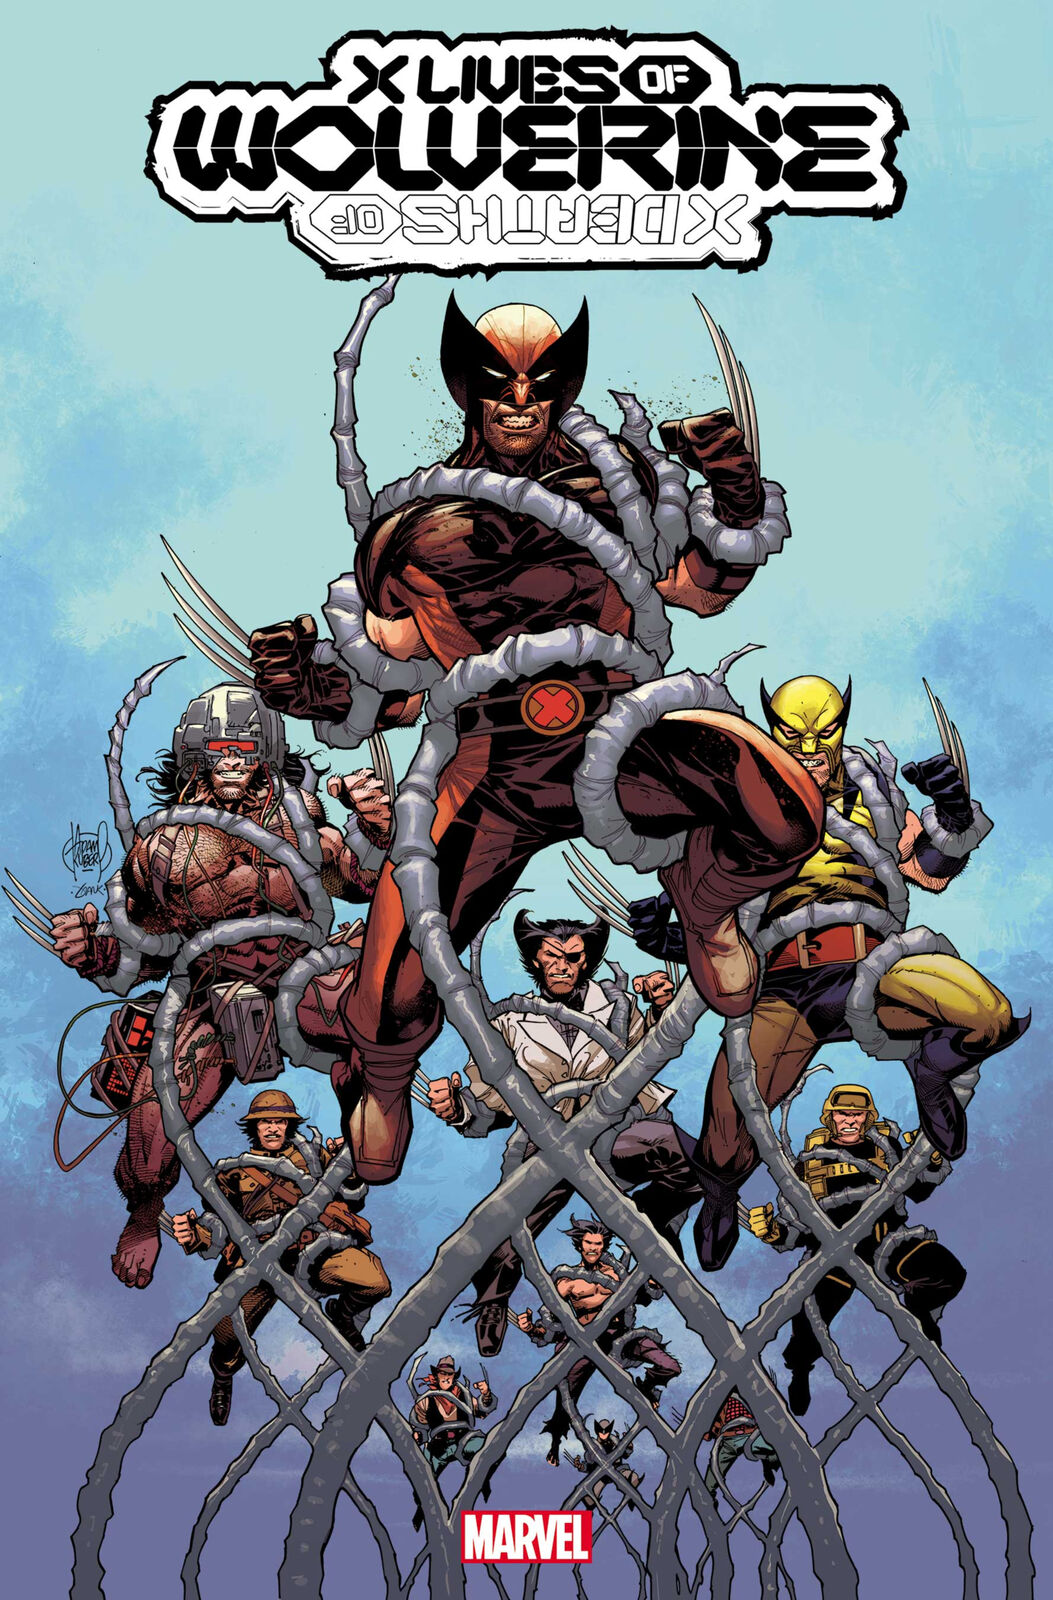 X Lives of Wolverine #1 EST. 1/19 (Variant covers available) MARVEL